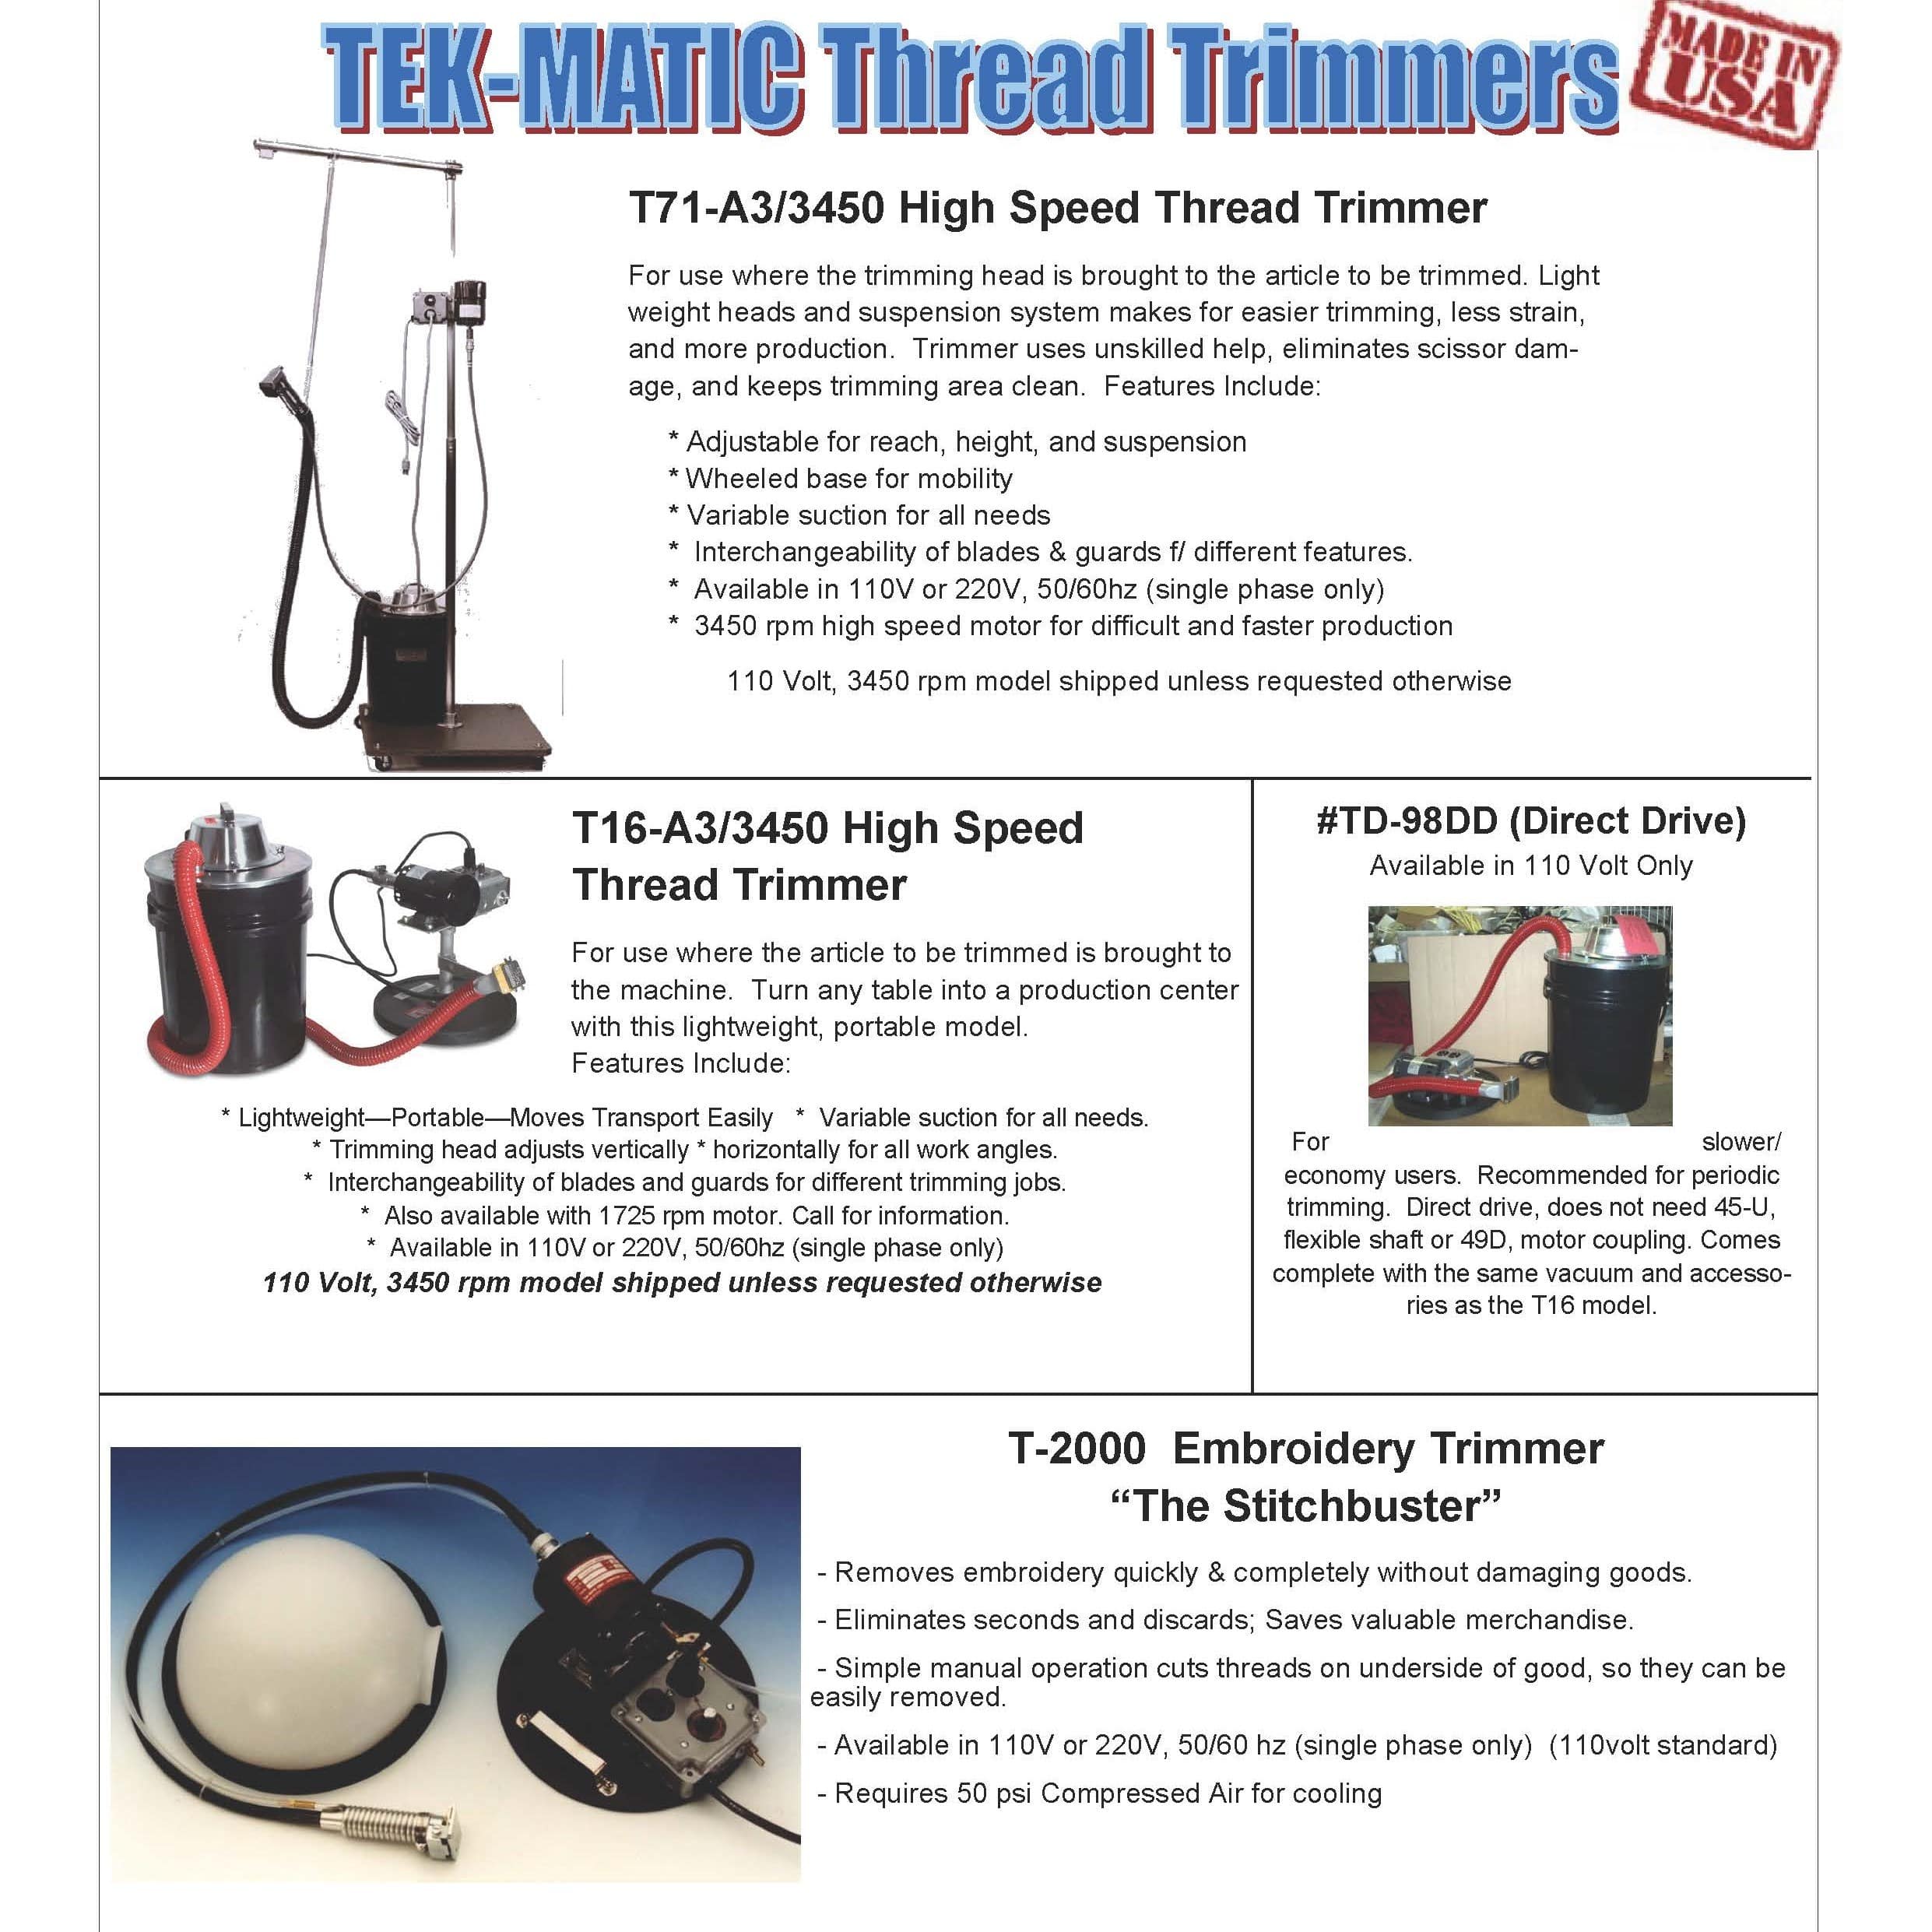 TEK-MATIC THREAD TRIMMERS
T71-A3/3450 HIGH SPEED THREAD TRIMMER
T-16/3450 HIGH SPEED THREAD TRIMMER
TD-98DD (DIRECT DRIVE) THREAD TRIMMER
T-2000 EMBROIDERY TRIM